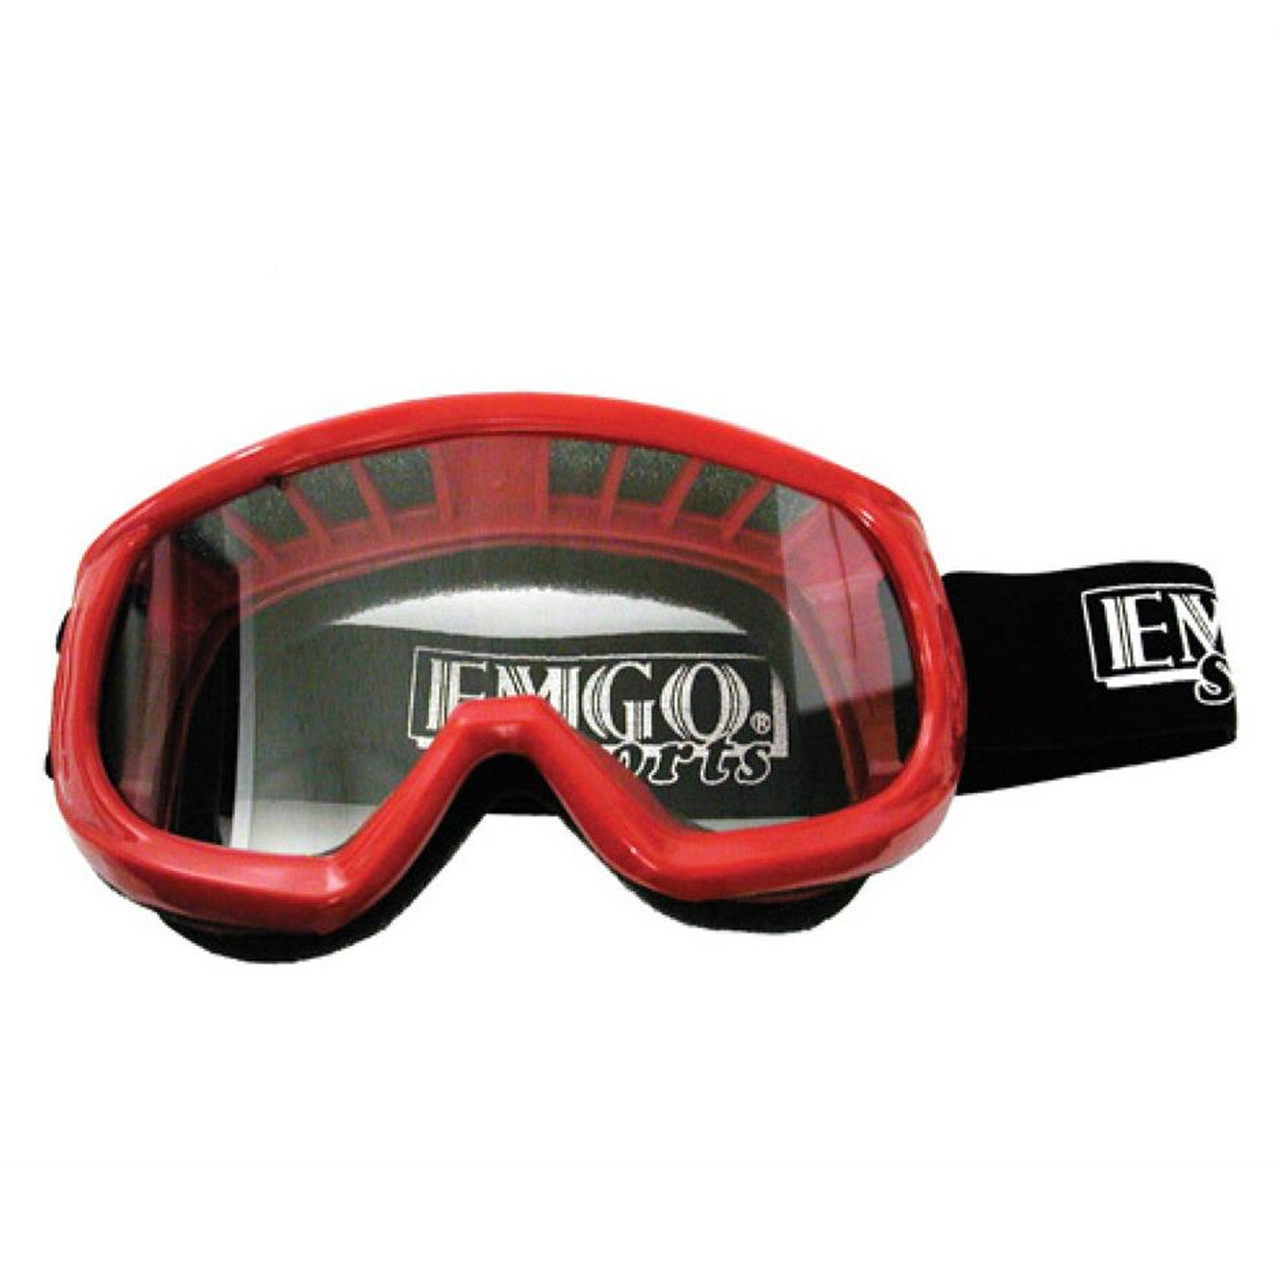 New Emgo Replacement Replacement Lens Clear EMGO Goggles, M495, 76-49570